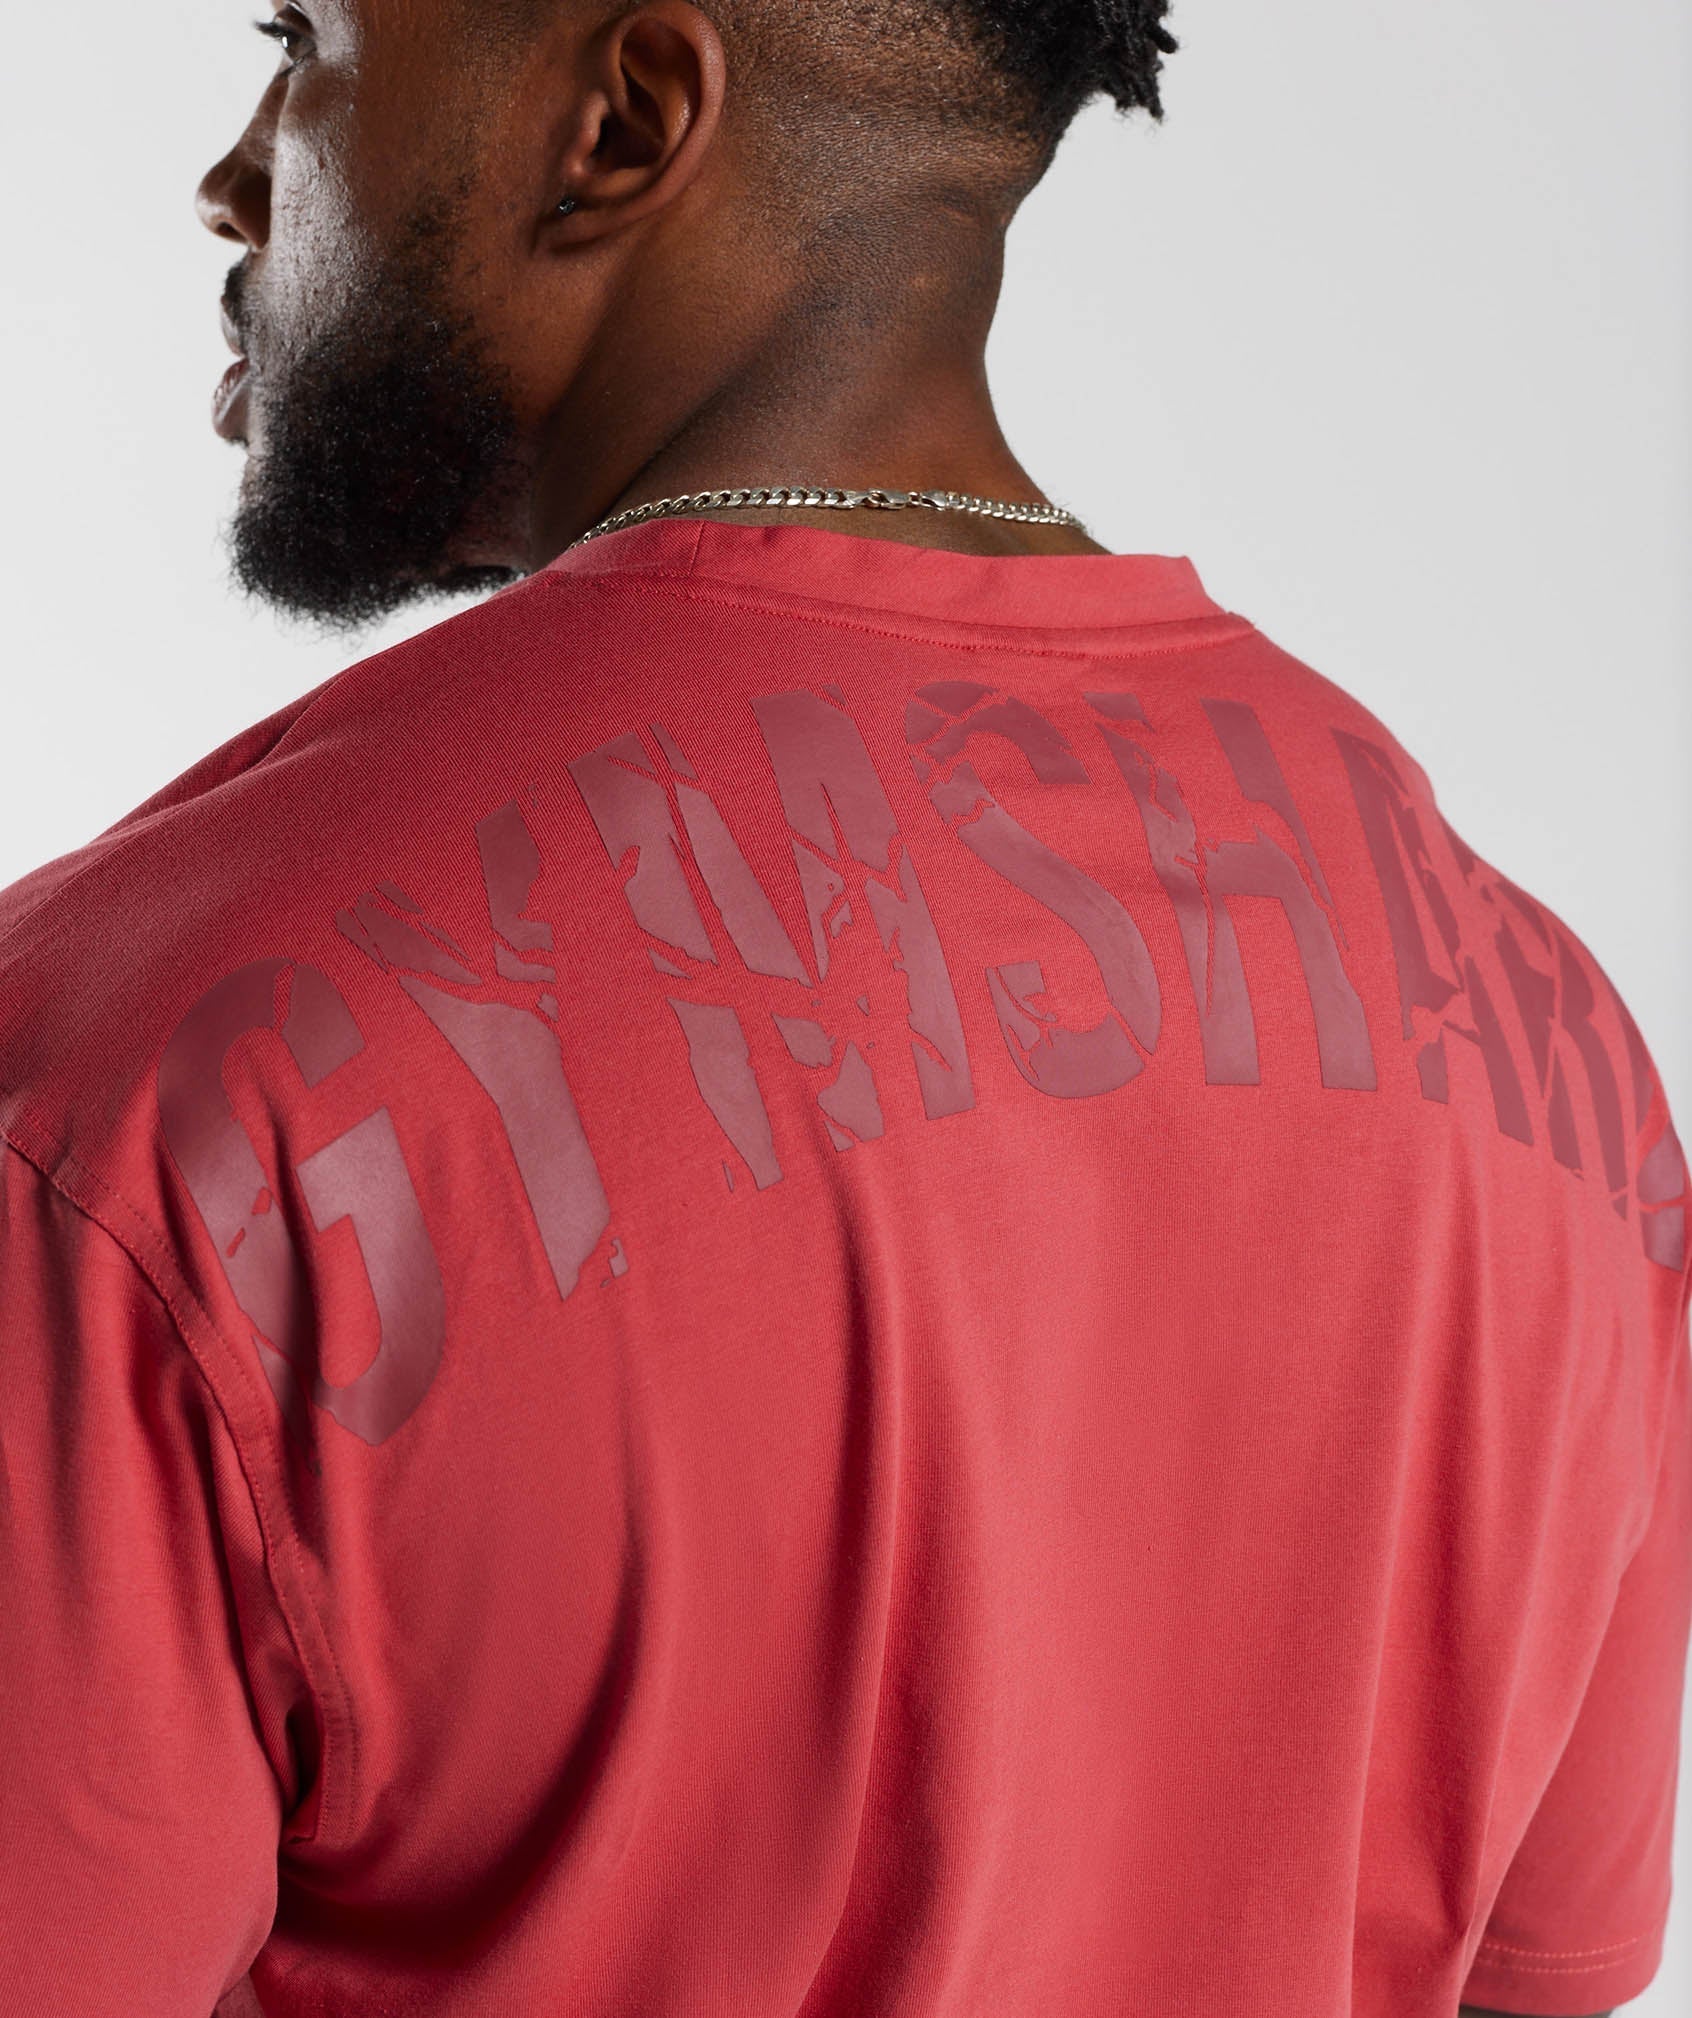 Power T-Shirt in Sundried Red - view 5